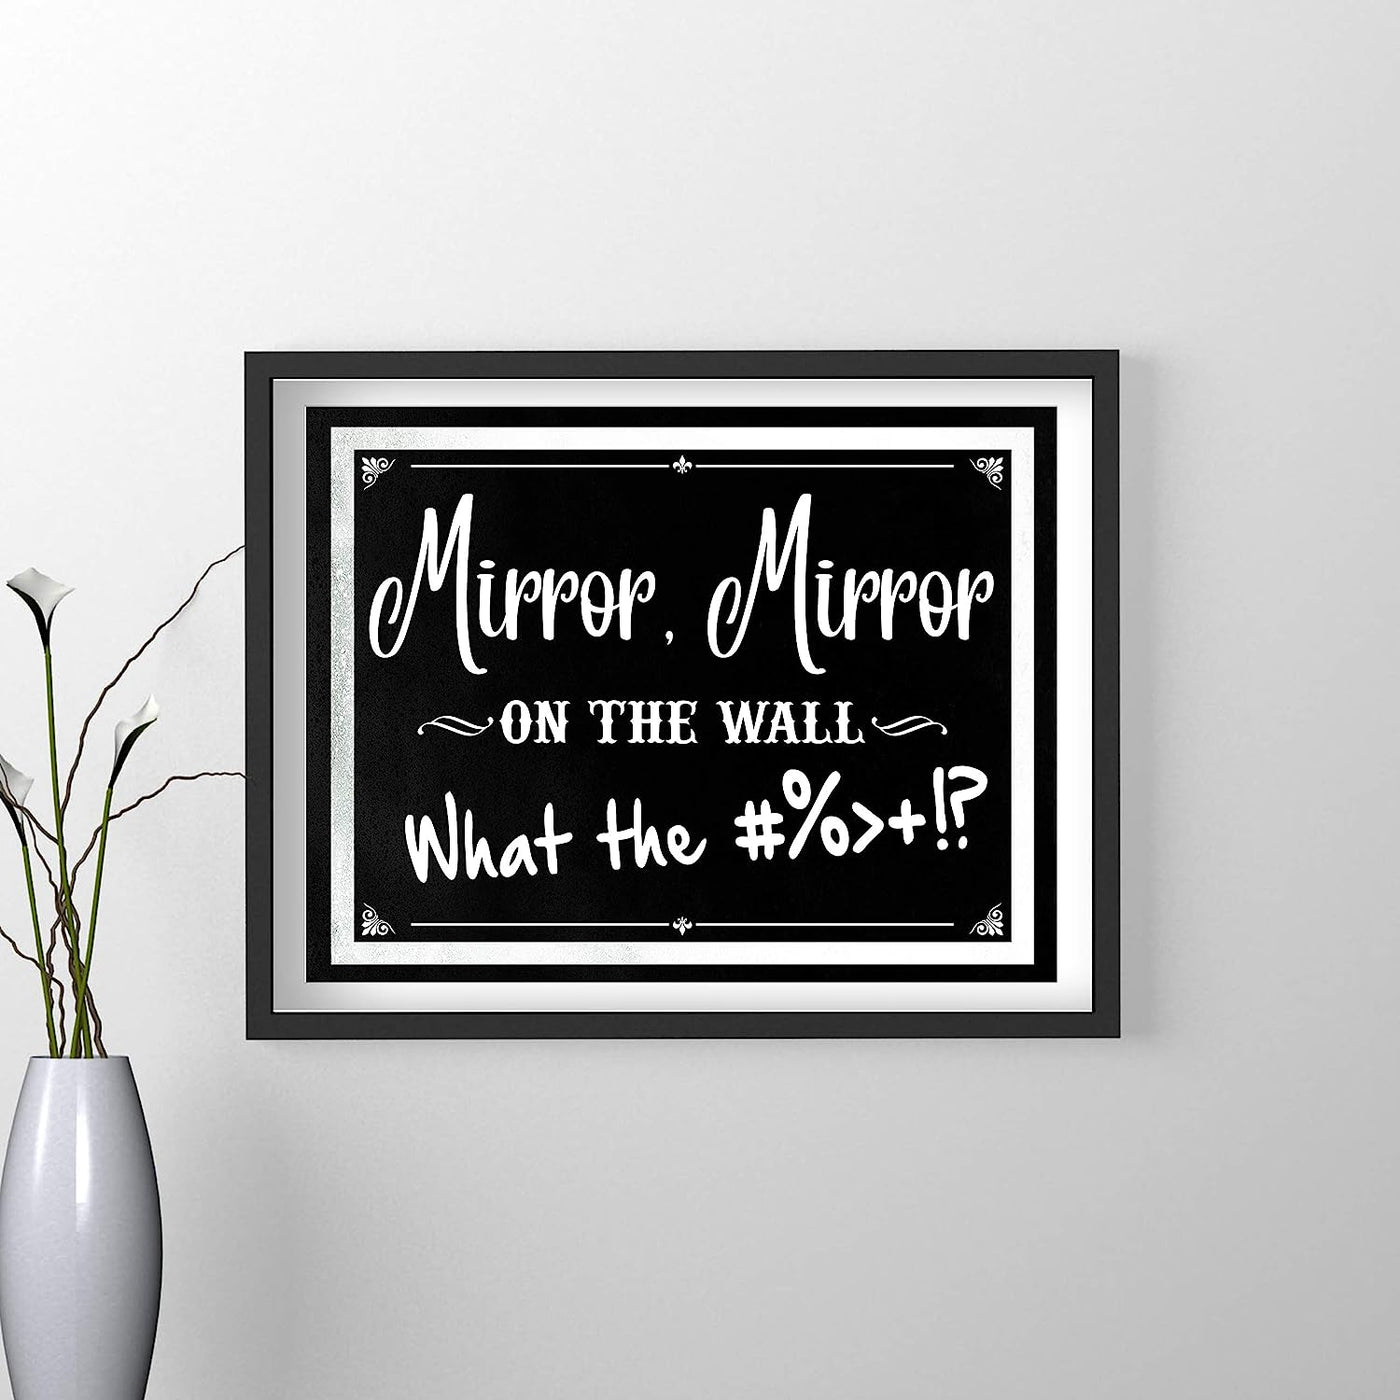 Mirror Mirror, On the Wall-What the #%>+!? Funny Bathroom Wall Decor-14 x 11" Sarcastic Typographic Art Print-Ready to Frame. Humorous Print for Home-Office-Bar-Studio-Cave Decor. Fun Novelty Gift!